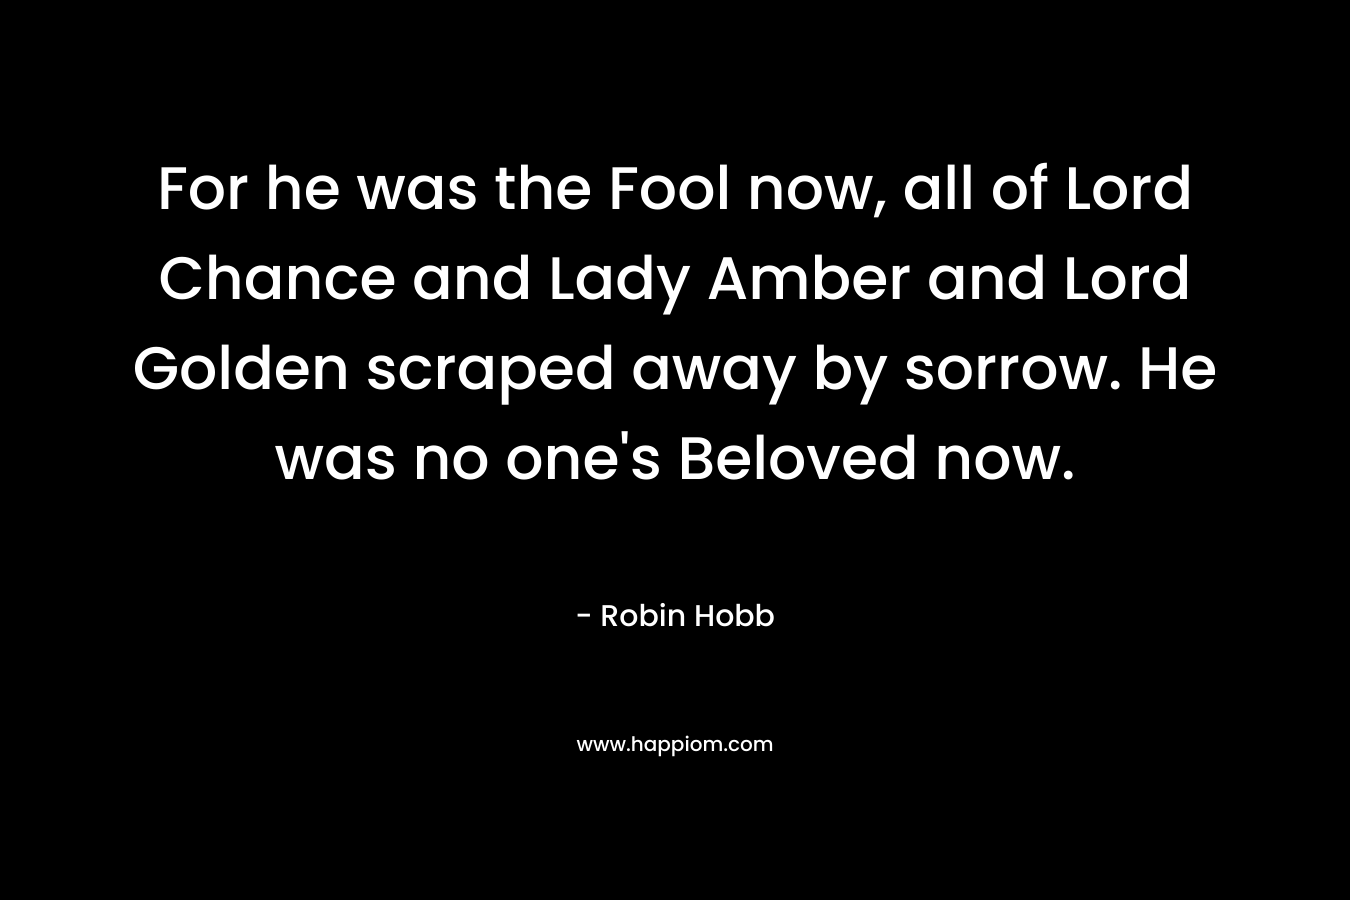 For he was the Fool now, all of Lord Chance and Lady Amber and Lord Golden scraped away by sorrow. He was no one’s Beloved now. – Robin Hobb